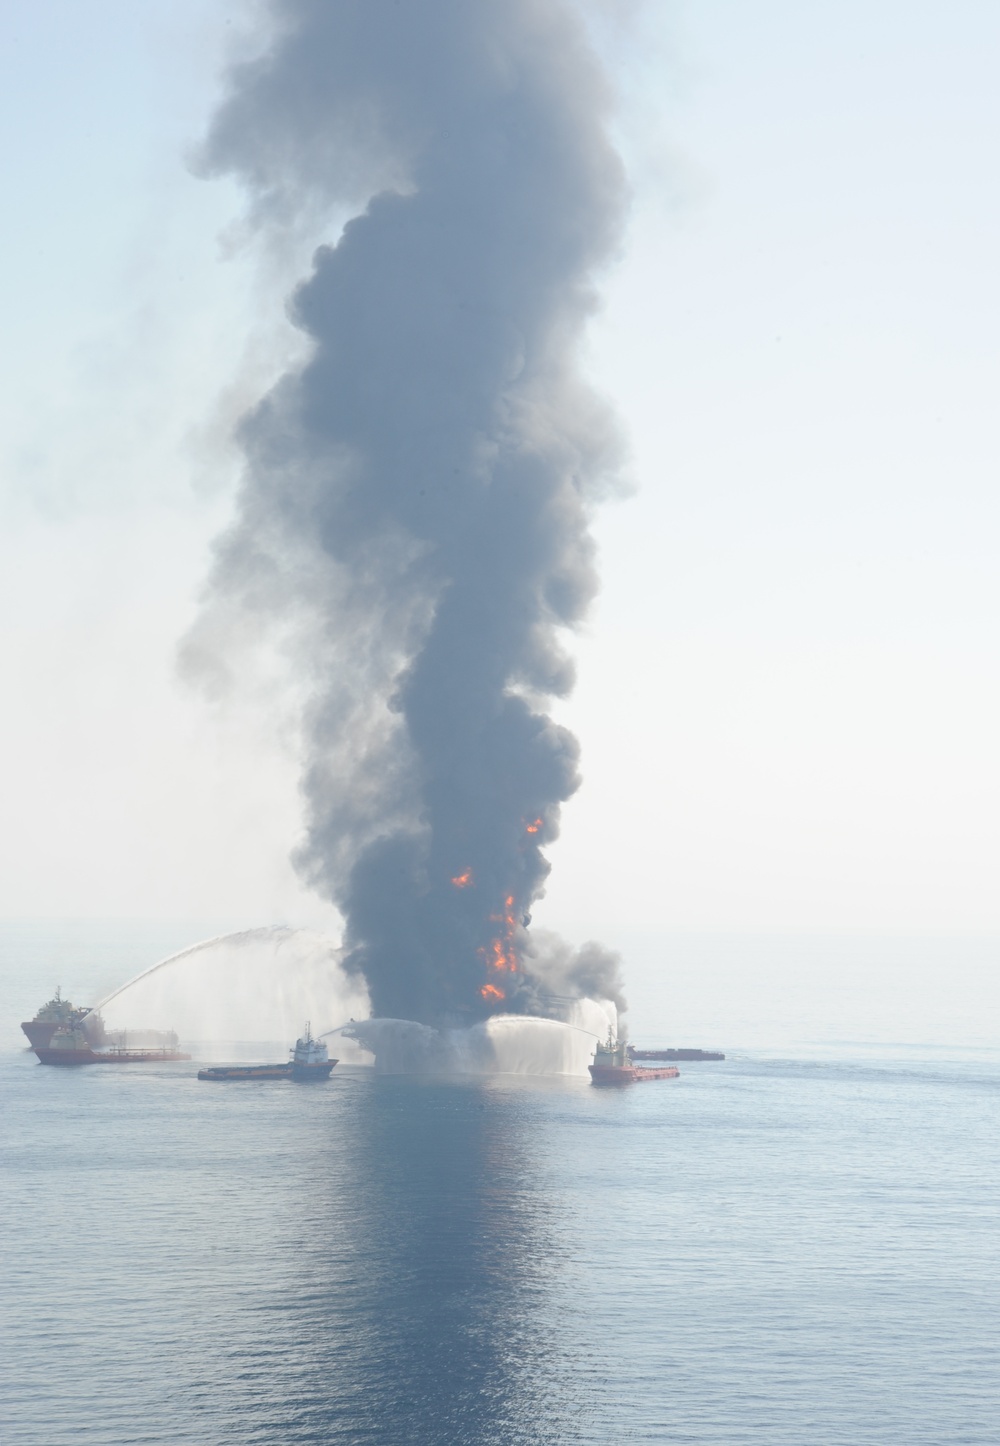 Assist Vessels Attempt to Extinguish Fires Aboard the Deepwater Horizon